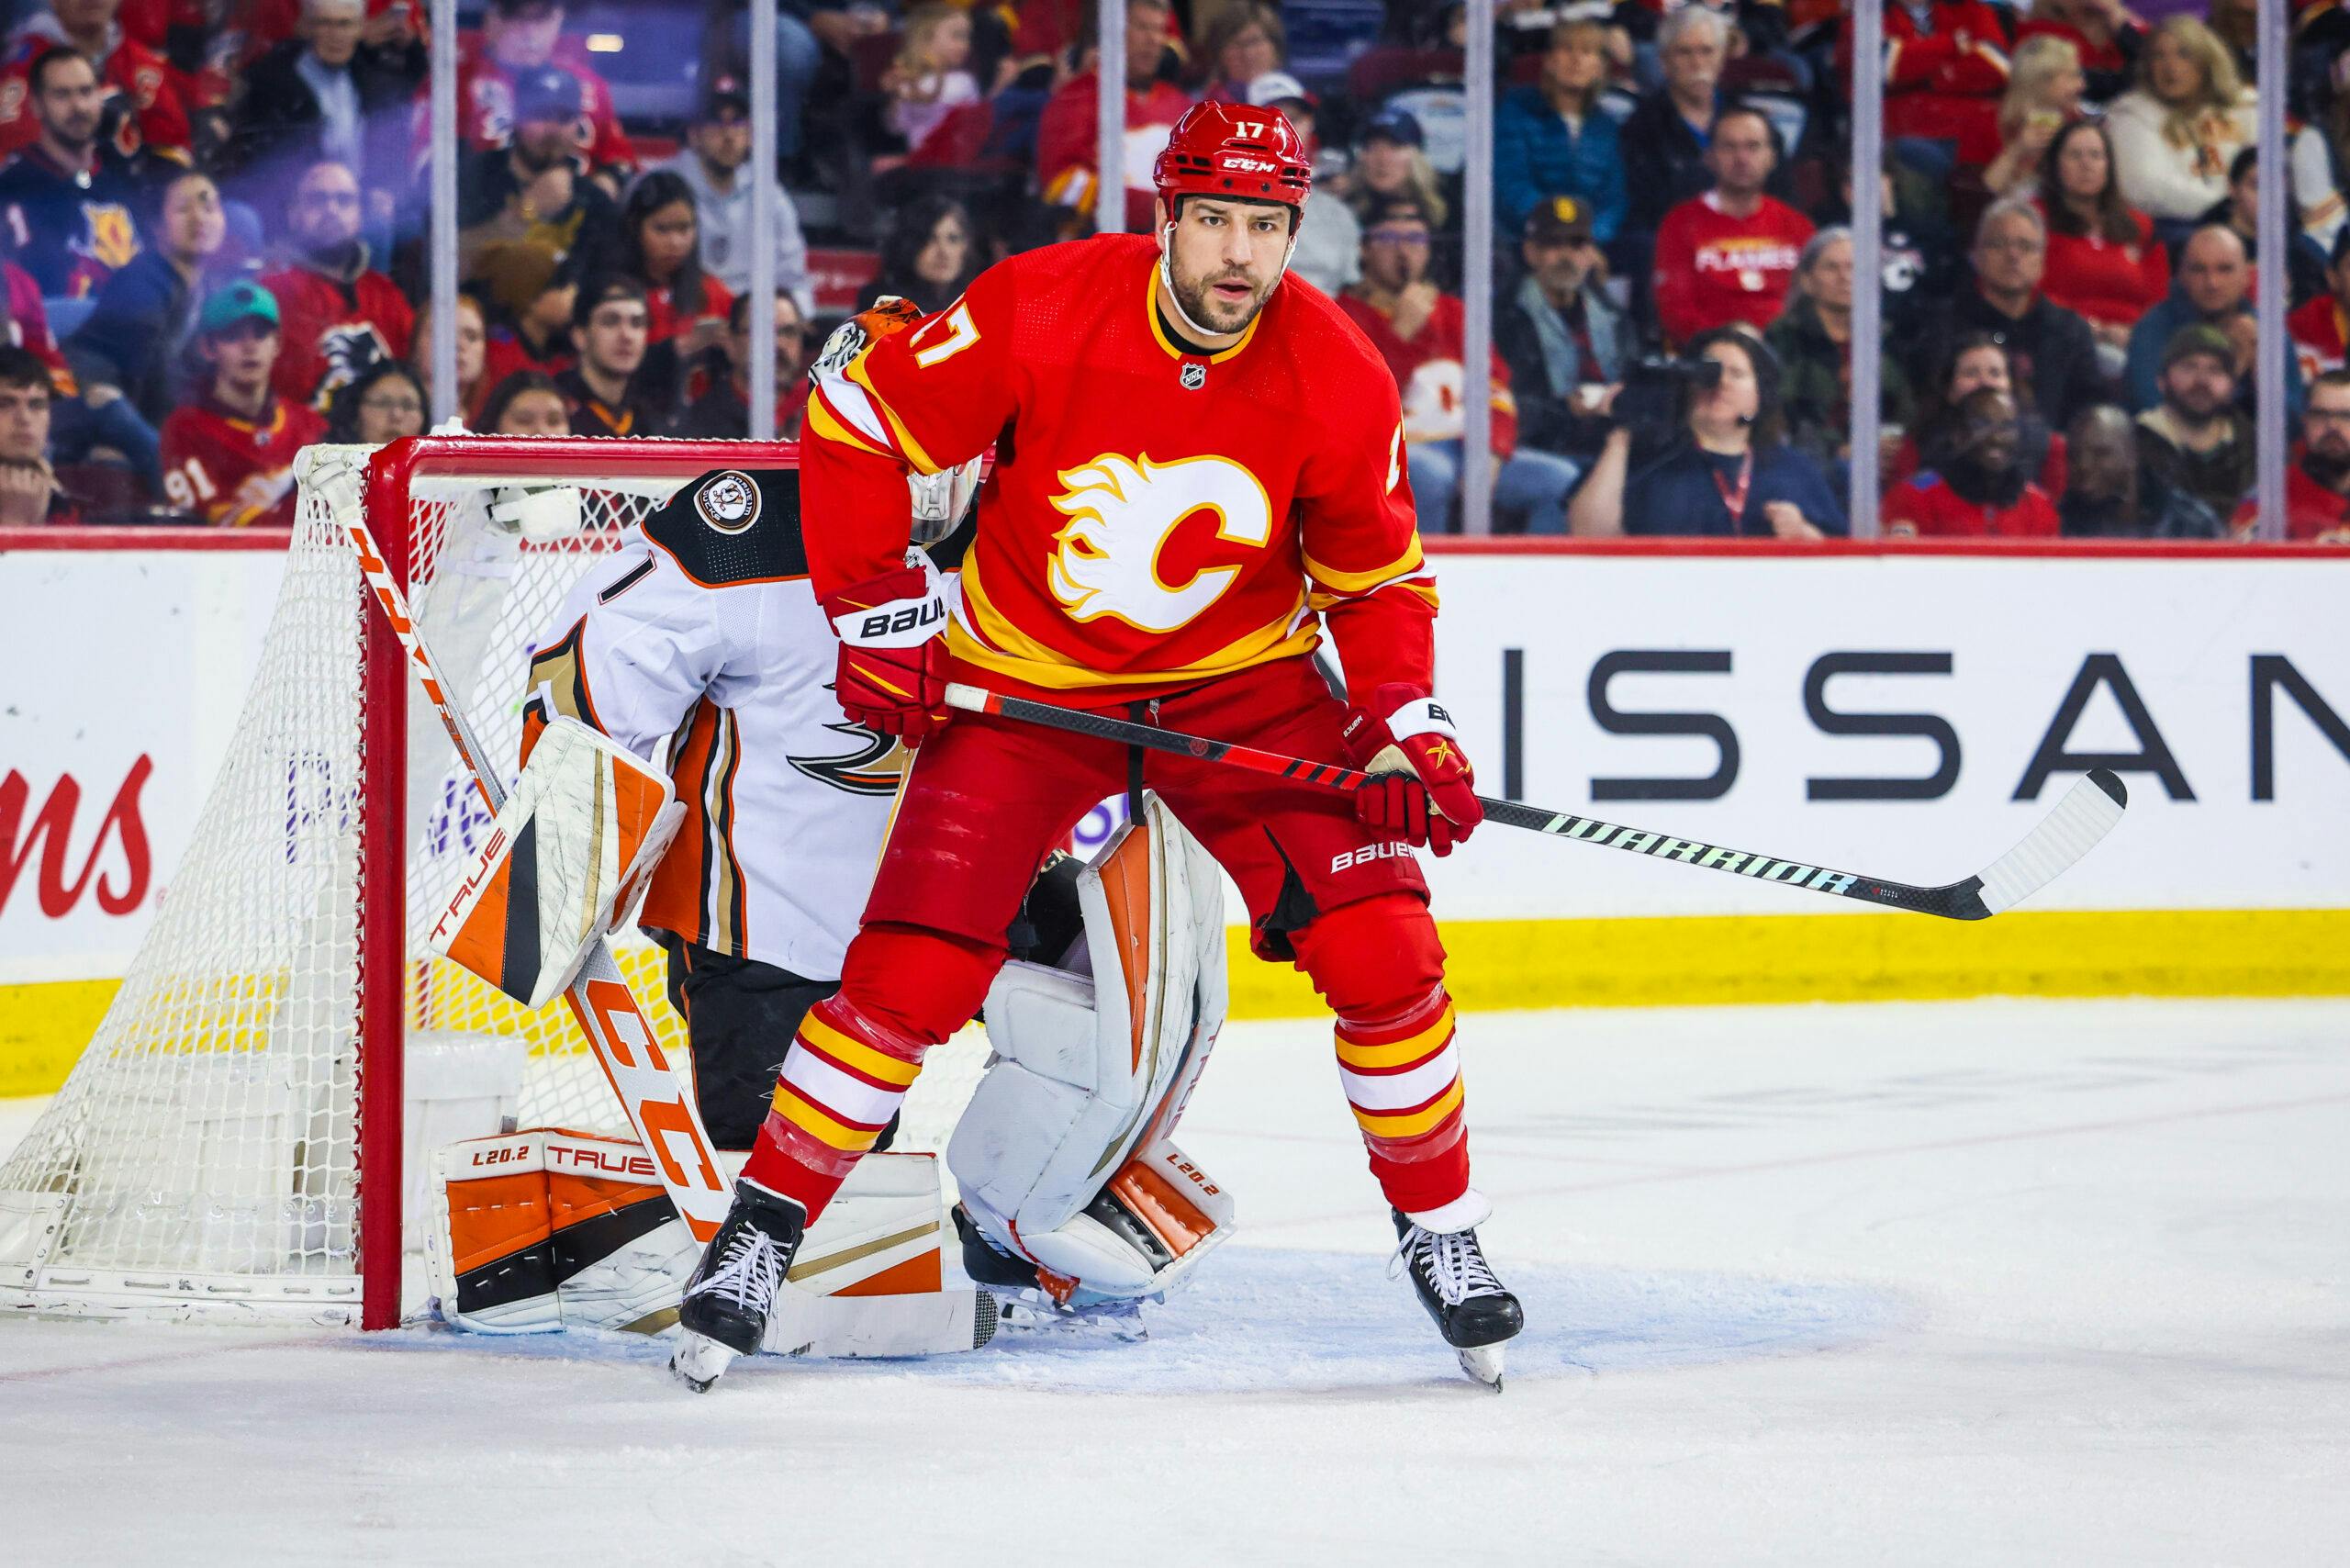 NHL-er Michael Stone retires, joins Calgary Flames in player